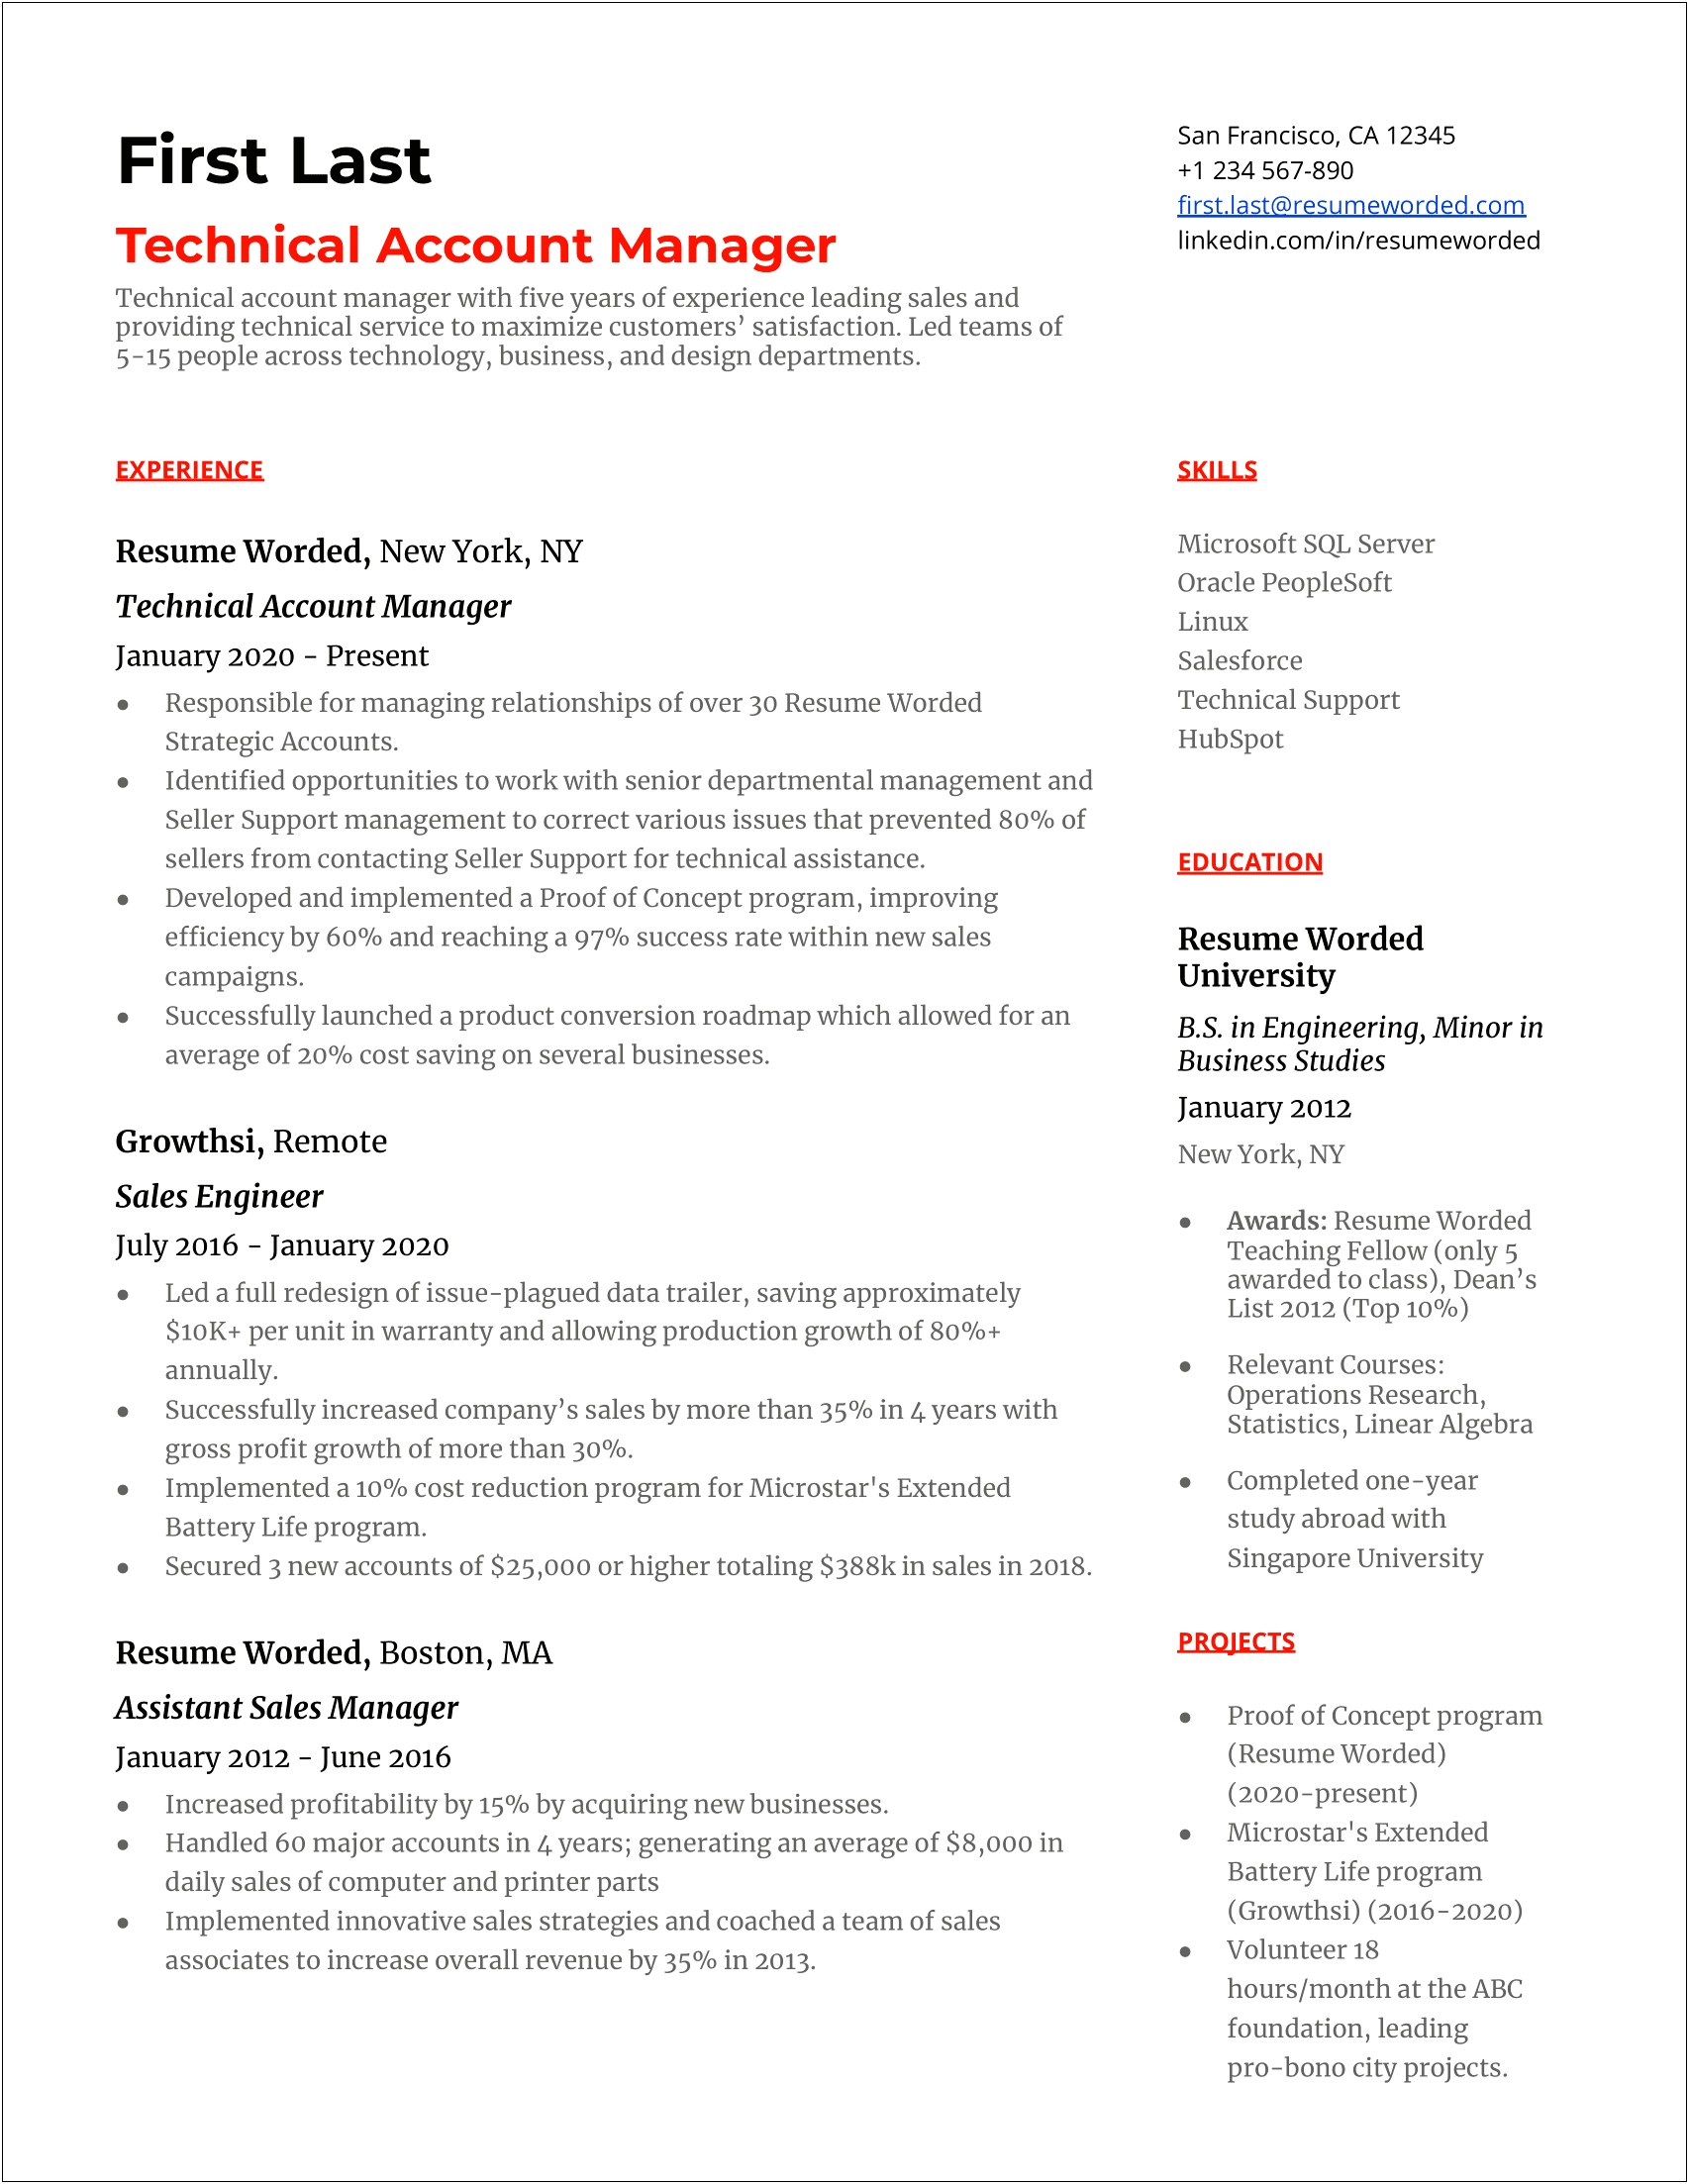 Technical Support Resume Samples India